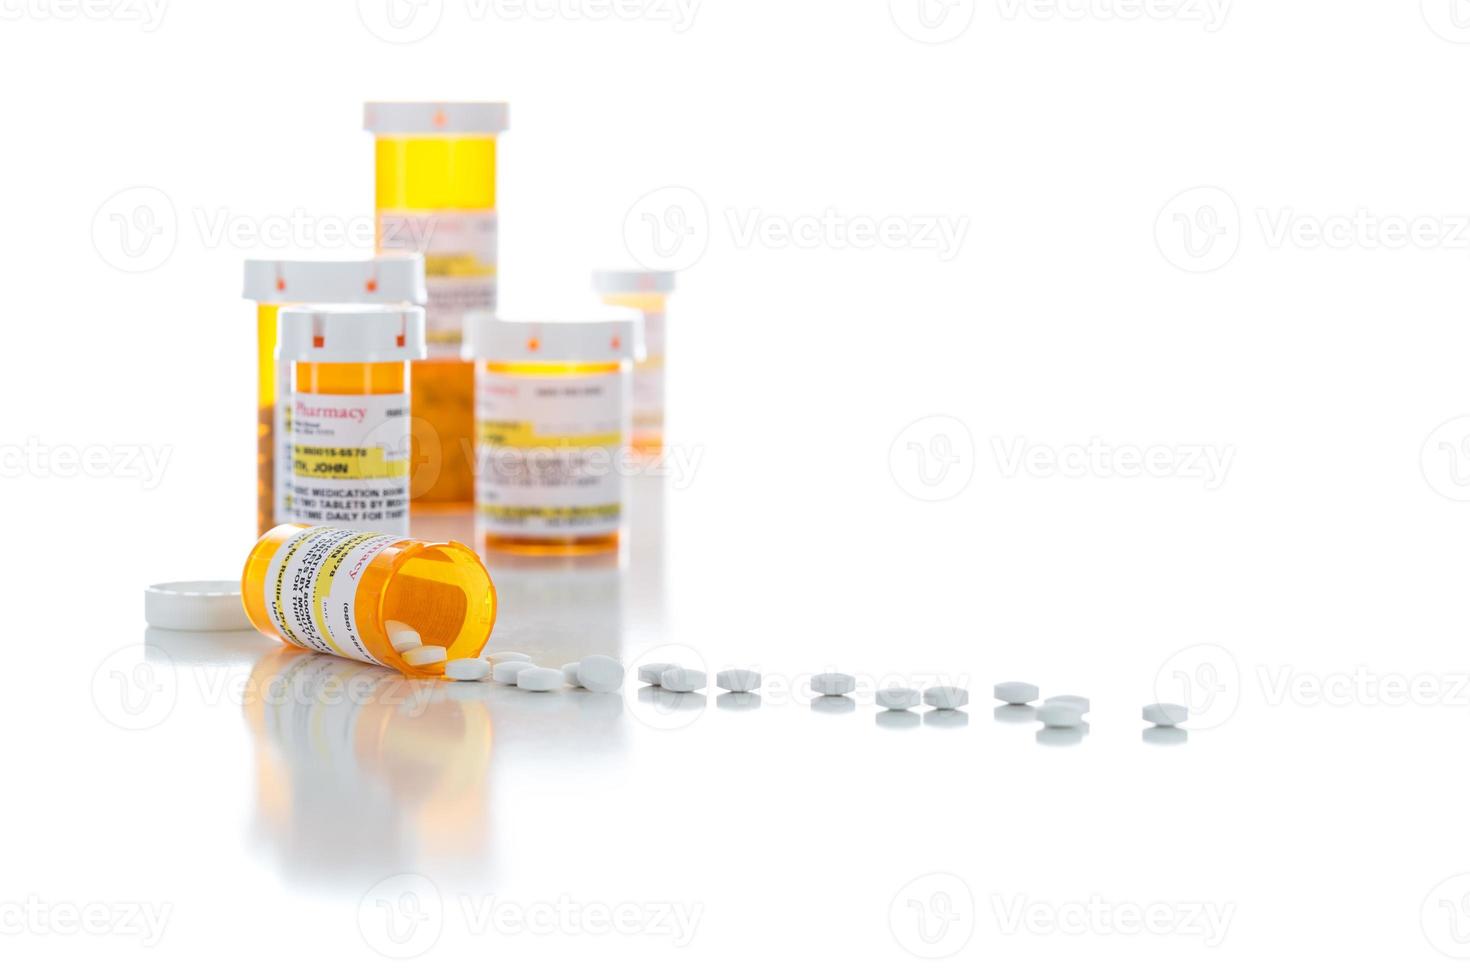 Non-Proprietary Medicine Prescription Bottles and Spilled Pills Isolated on White photo